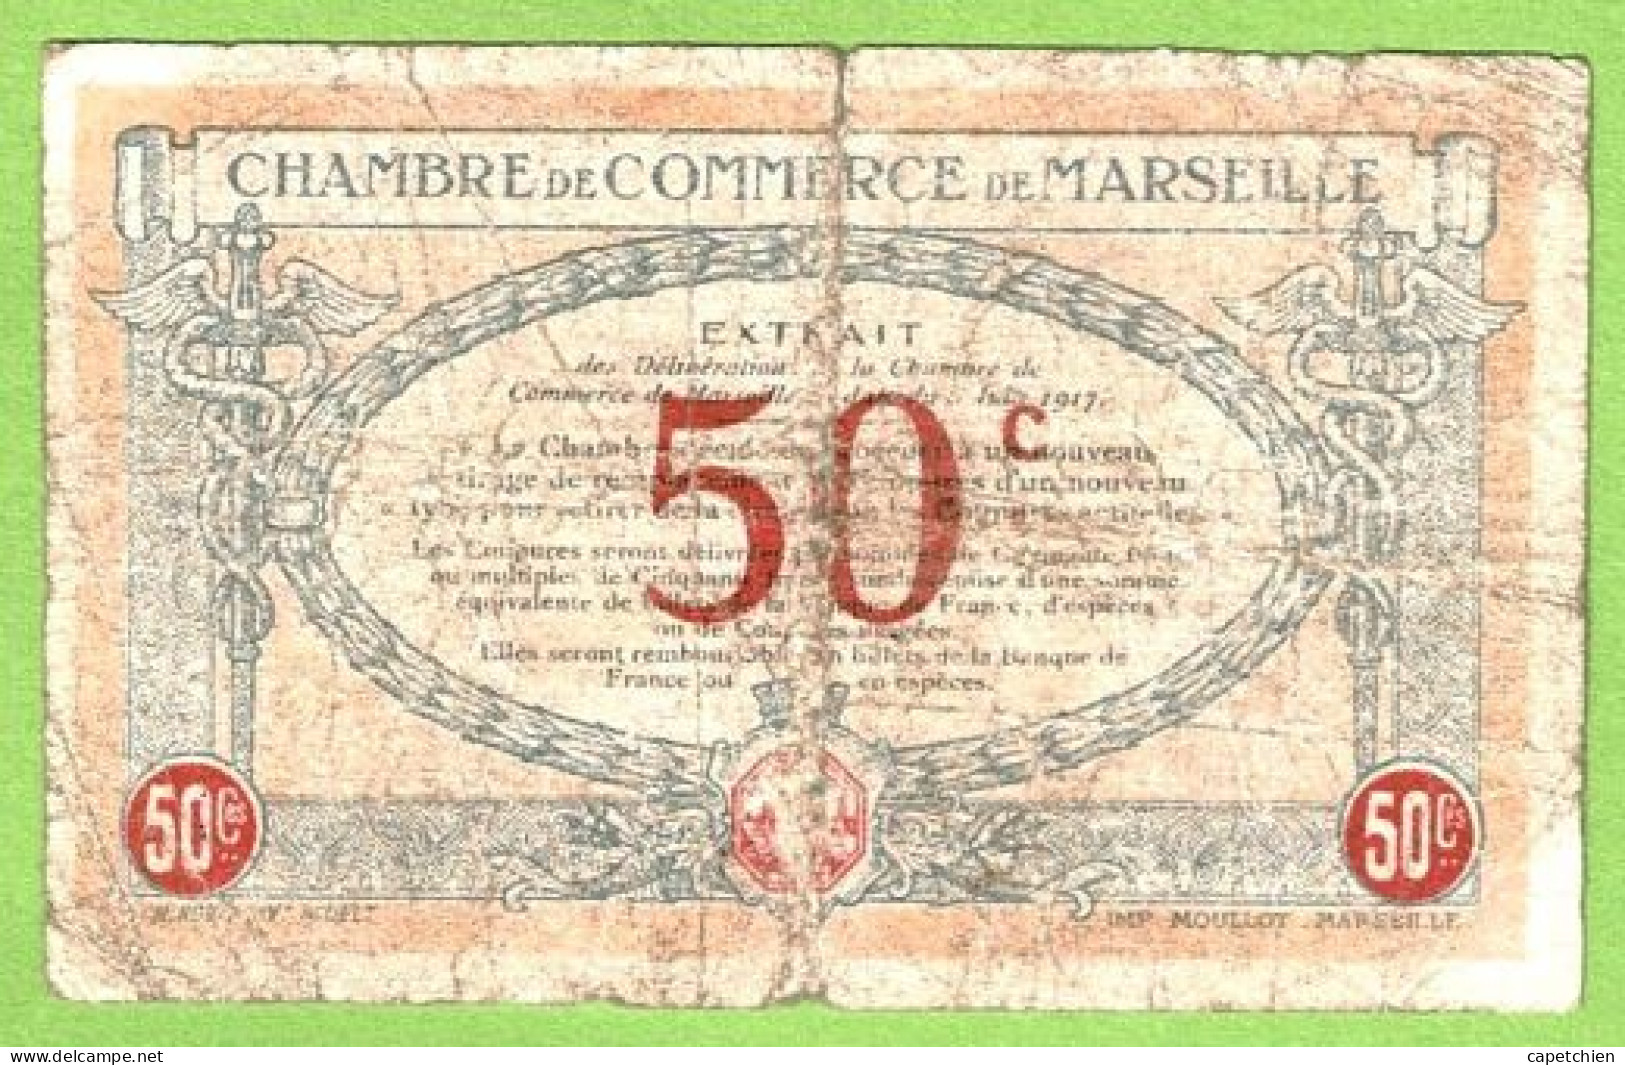 FRANCE / CHAMBRE De COMMERCE / MARSEILLE / 50 CENTIMES / 1917 / N° 57178 / SERIE C - R - Chamber Of Commerce